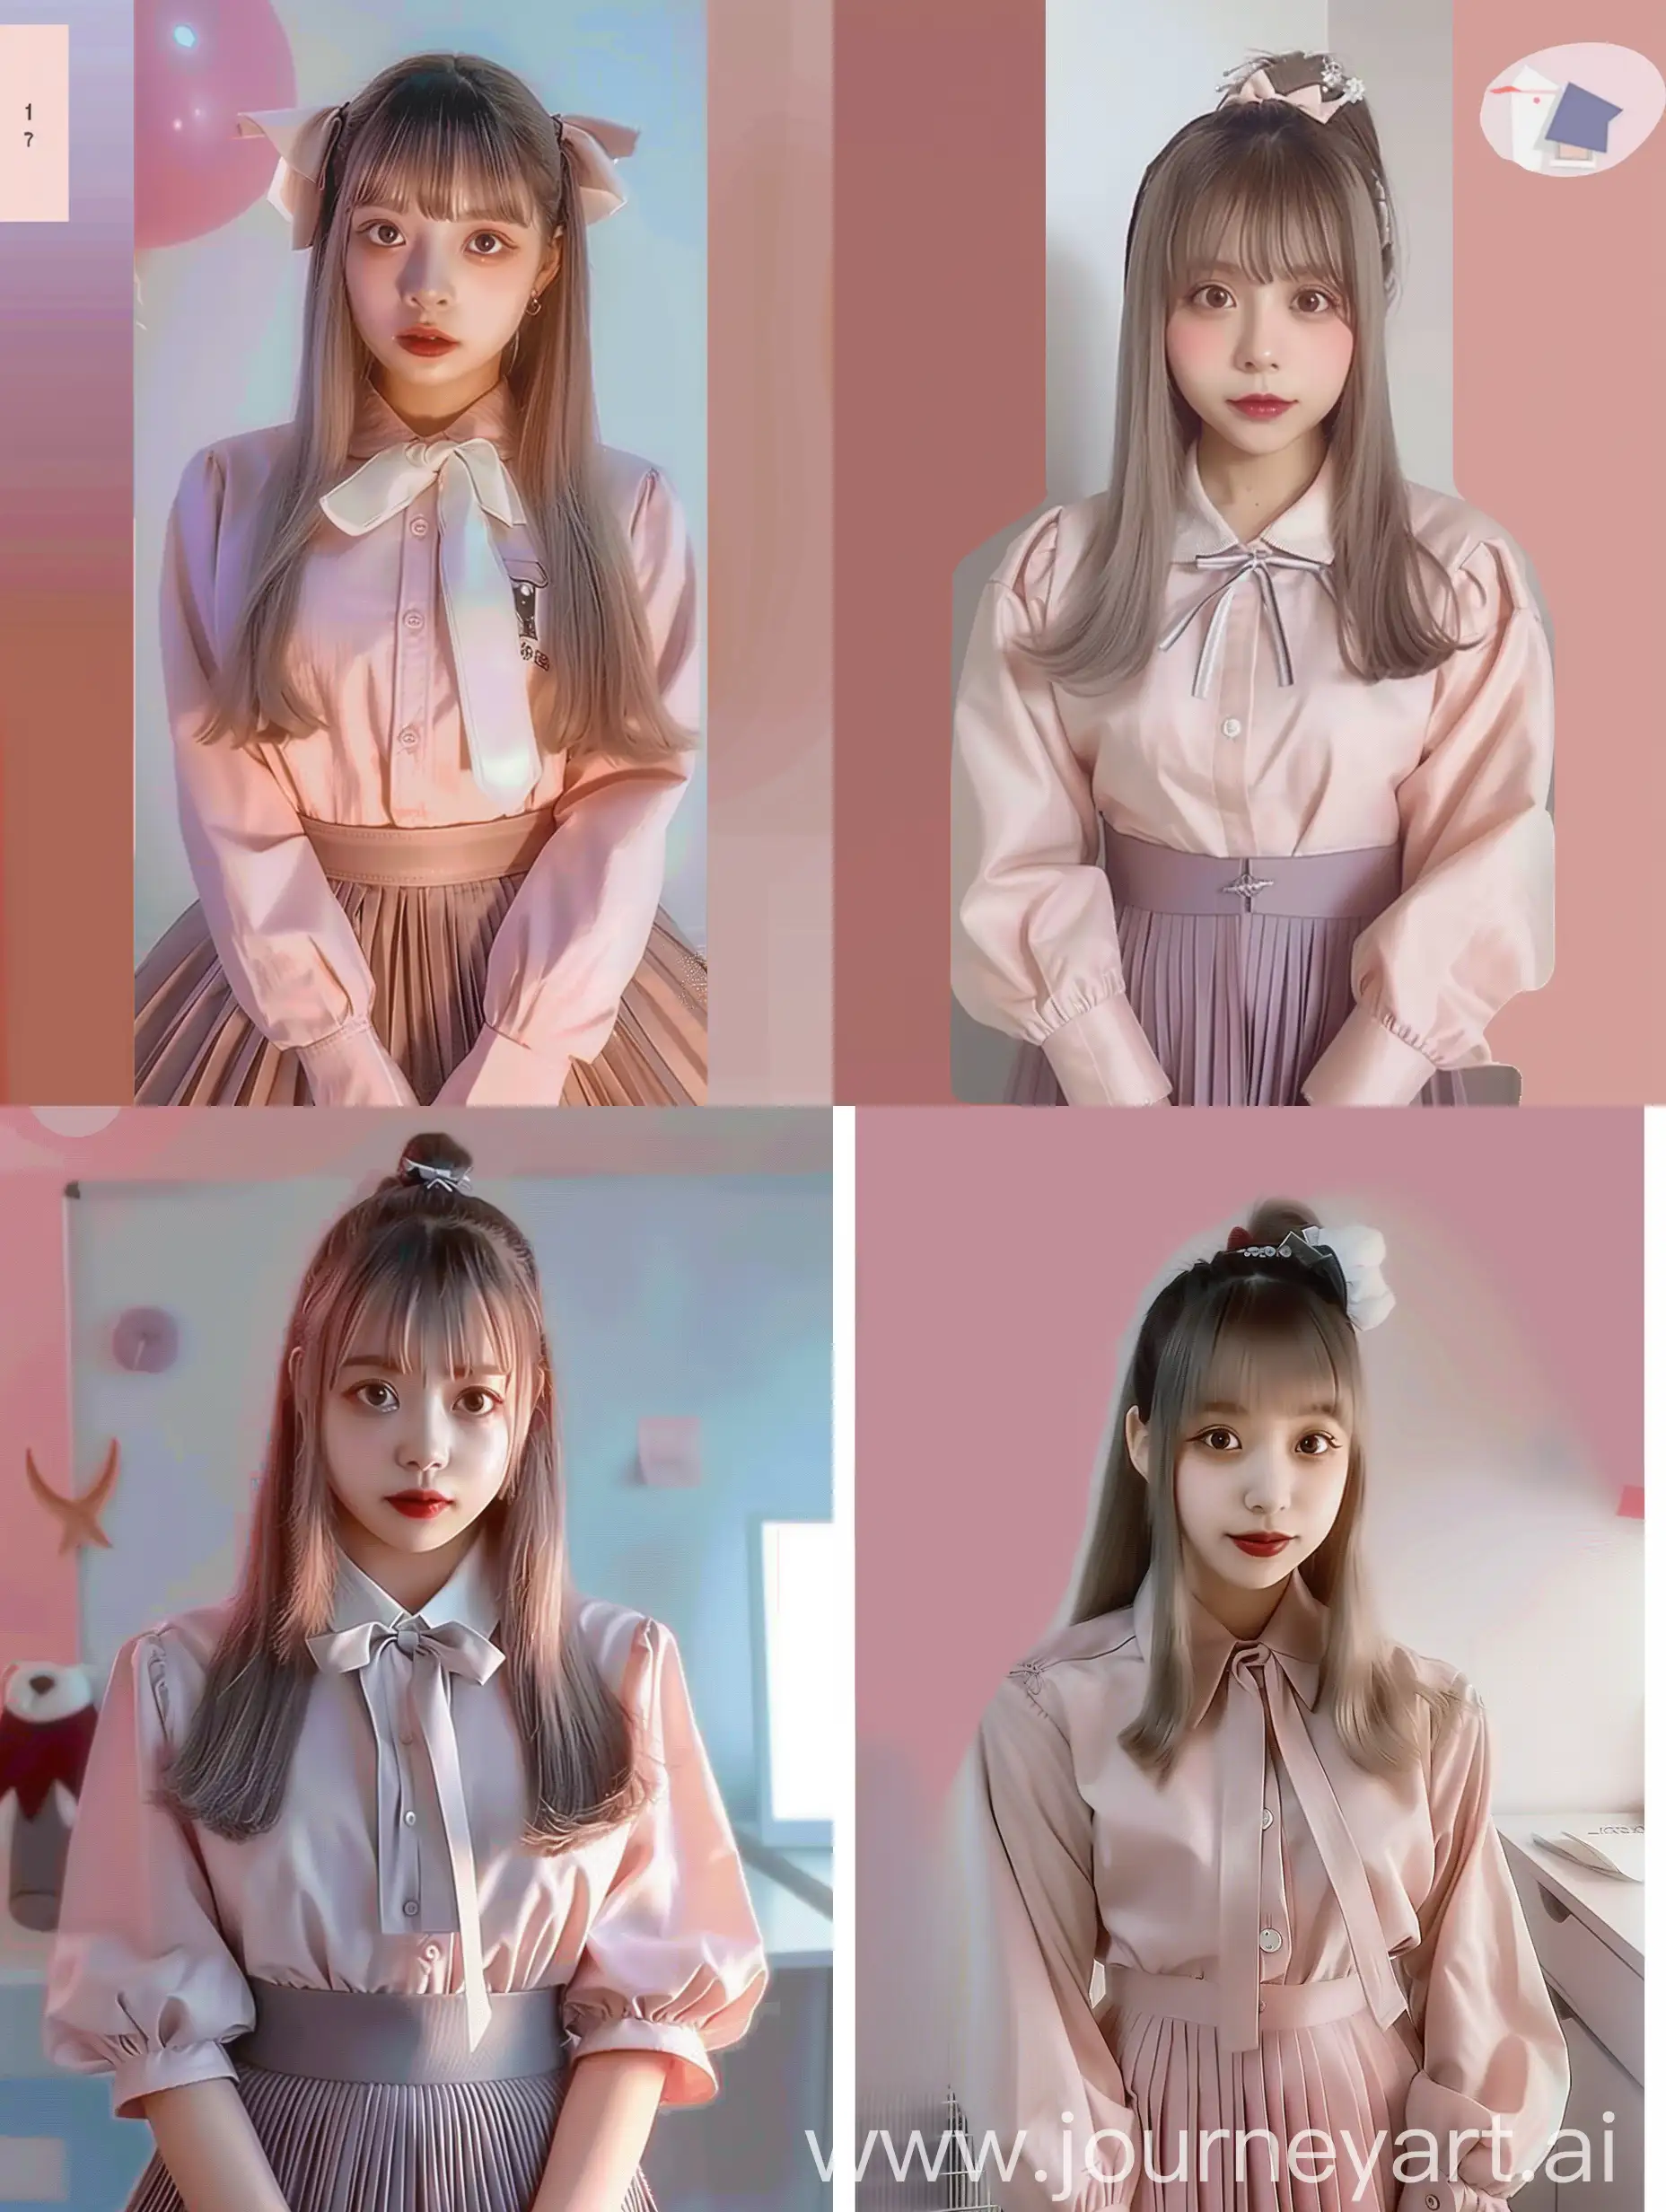 “Please transform the person in the existing photo into a mainstream idol similar to those from Nogizaka46 or AKB48. Ensure the following details:

	1.	Outfit: Dress the individual in a stylish and cute school uniform, including a pleated skirt, a neatly pressed blouse, and a ribbon or tie at the collar. The outfit should be in pastel colors or soft tones, typical of idol fashion.
	2.	Hairstyle: Give the individual a well-groomed hairstyle, such as long straight hair with bangs or a high ponytail. The hair should appear shiny and healthy, with a natural dark color.
	3.	Makeup: Apply light and natural makeup, enhancing the individual’s features with soft tones. Focus on clear skin, rosy cheeks, and a subtle lip color to achieve a fresh and youthful look.
	4.	Pose and Expression: Ensure the person is posing in a friendly and approachable manner. The expression should be cheerful and bright, with a gentle smile or a slight tilt of the head to convey charm and warmth.
	5.	Background: Set the background in a simple, clean environment that complements the idol theme. It could be a soft gradient or a lightly blurred classroom or stage setting, keeping the focus on the individual.
	6.	Accessories: Add minimal accessories such as a small hair clip, a delicate bracelet, or a simple necklace to enhance the idol look without overwhelming it.
	7.	Overall Aesthetic: Maintain a polished and professional finish, ensuring the overall image is high quality and visually appealing, reflecting the polished appearance of mainstream idols.”